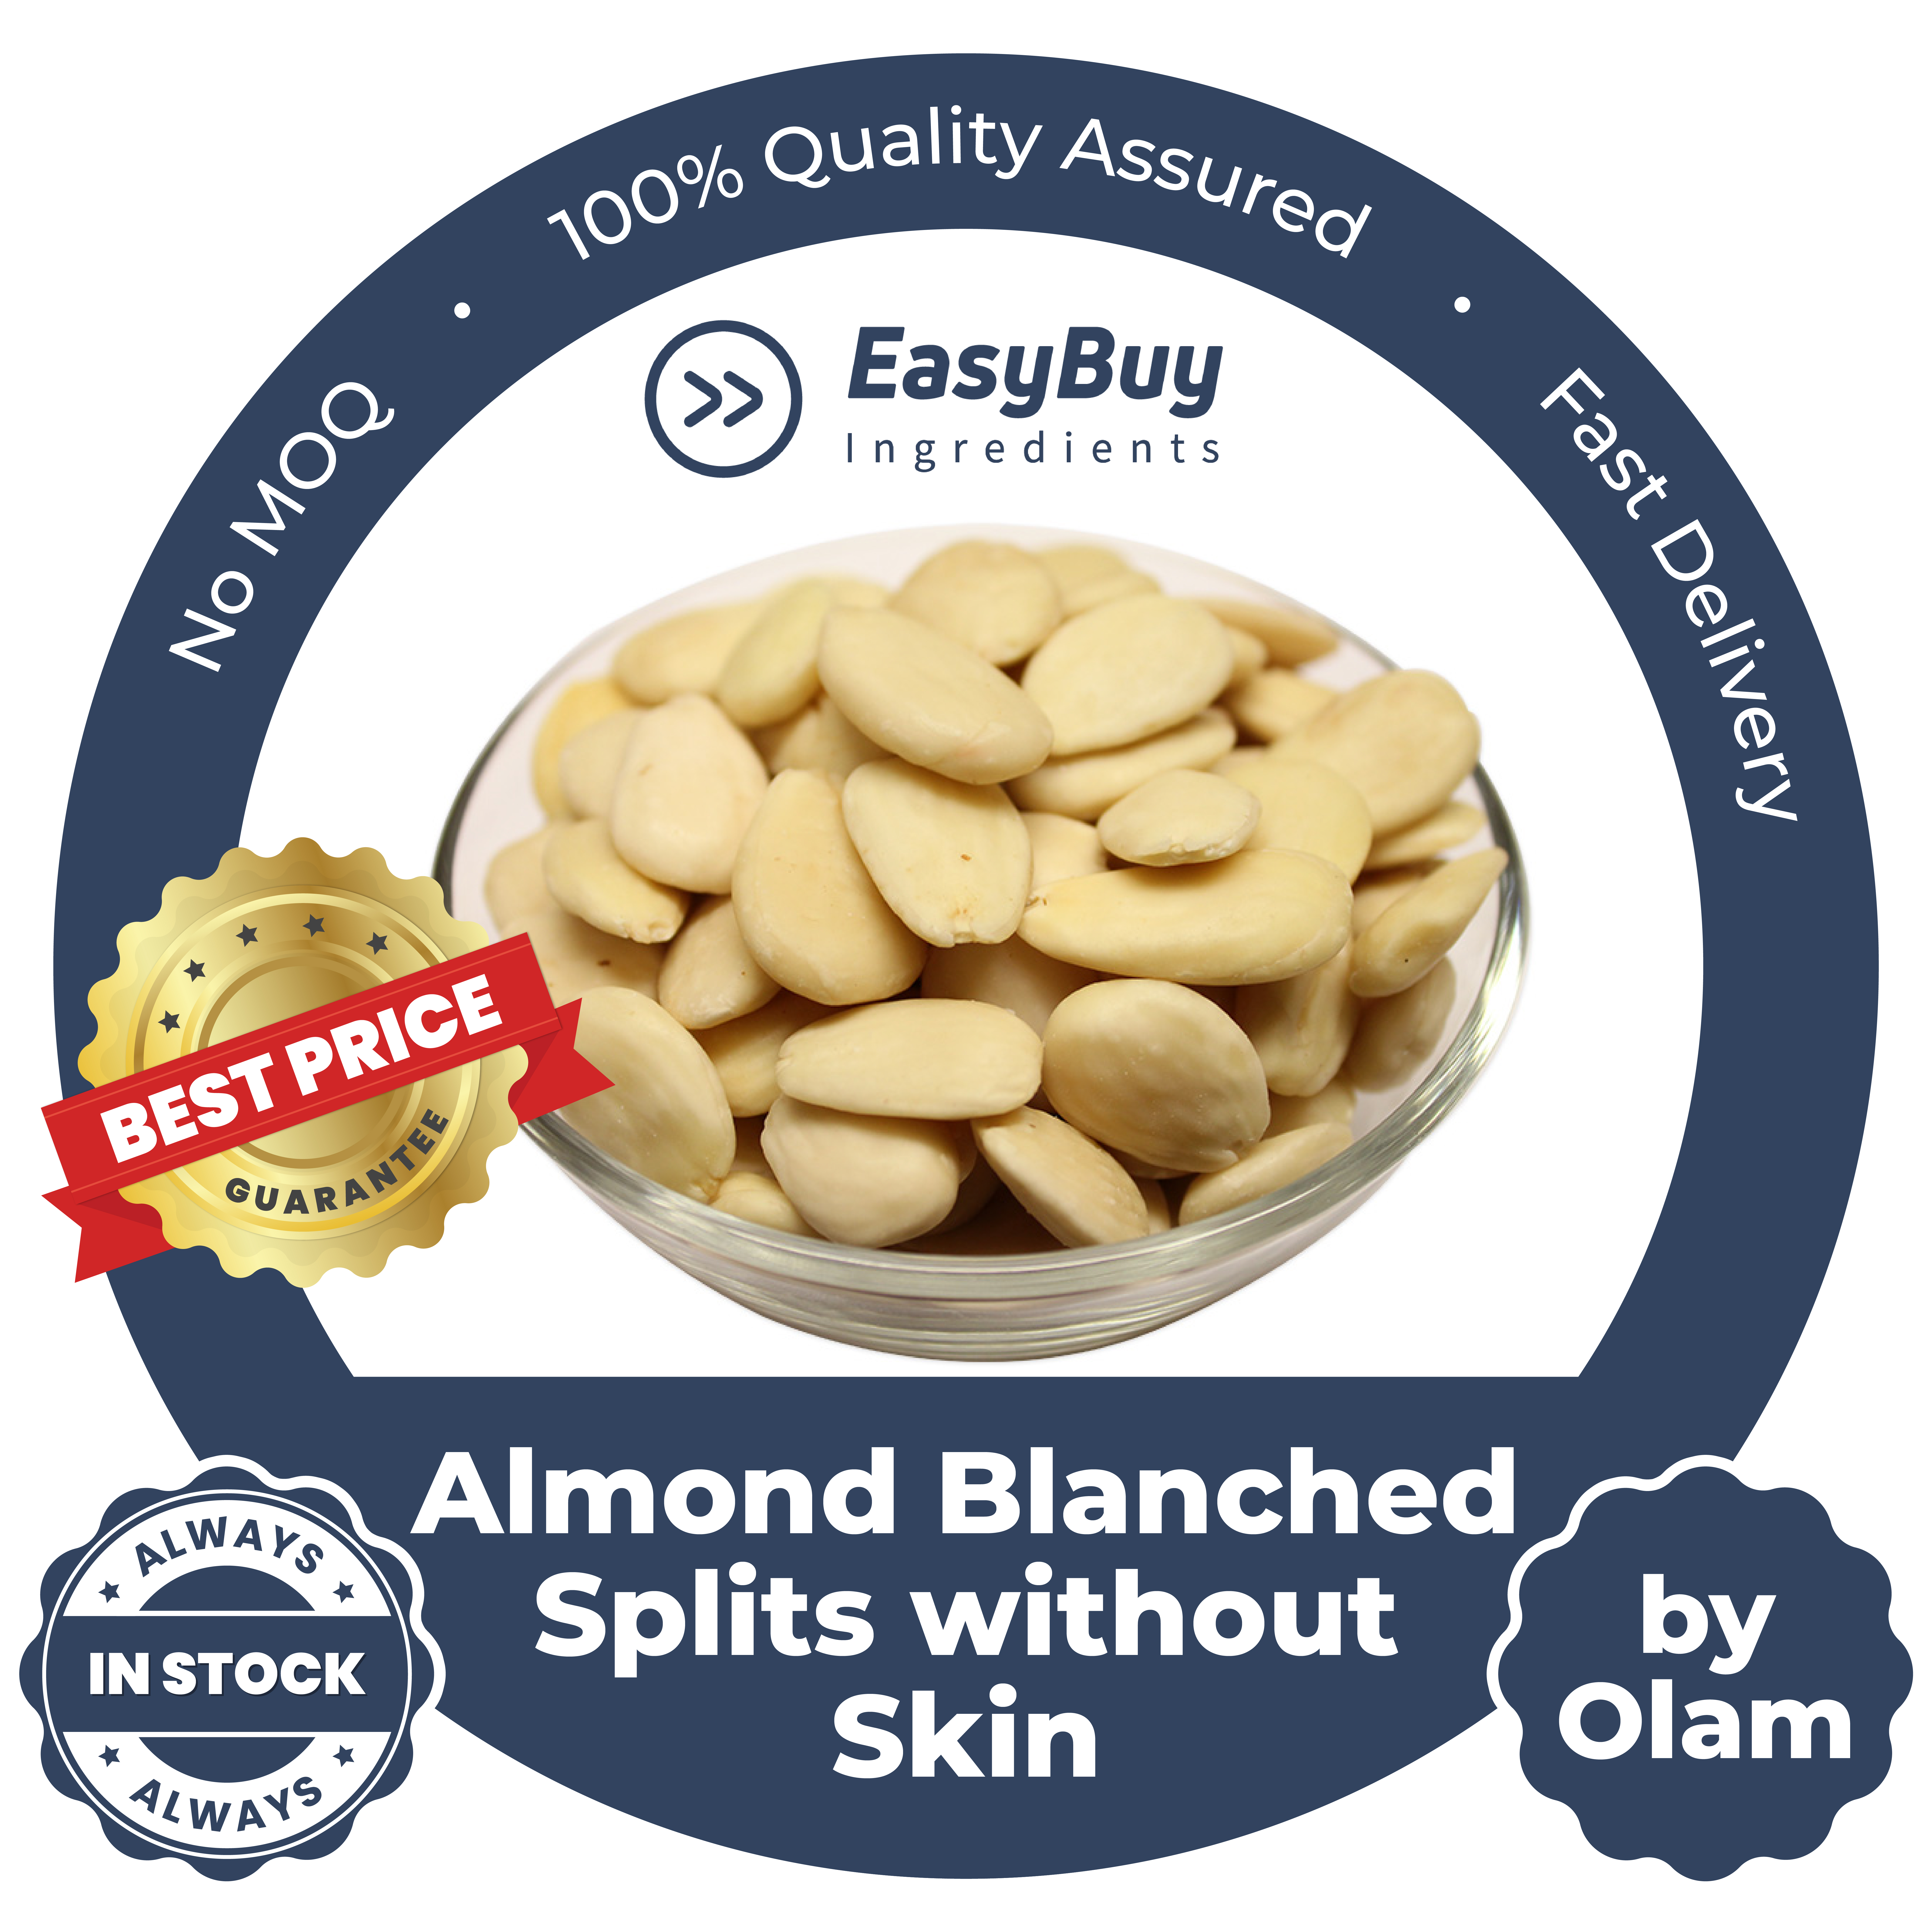 Almond Blanched splits without Skin by Olam